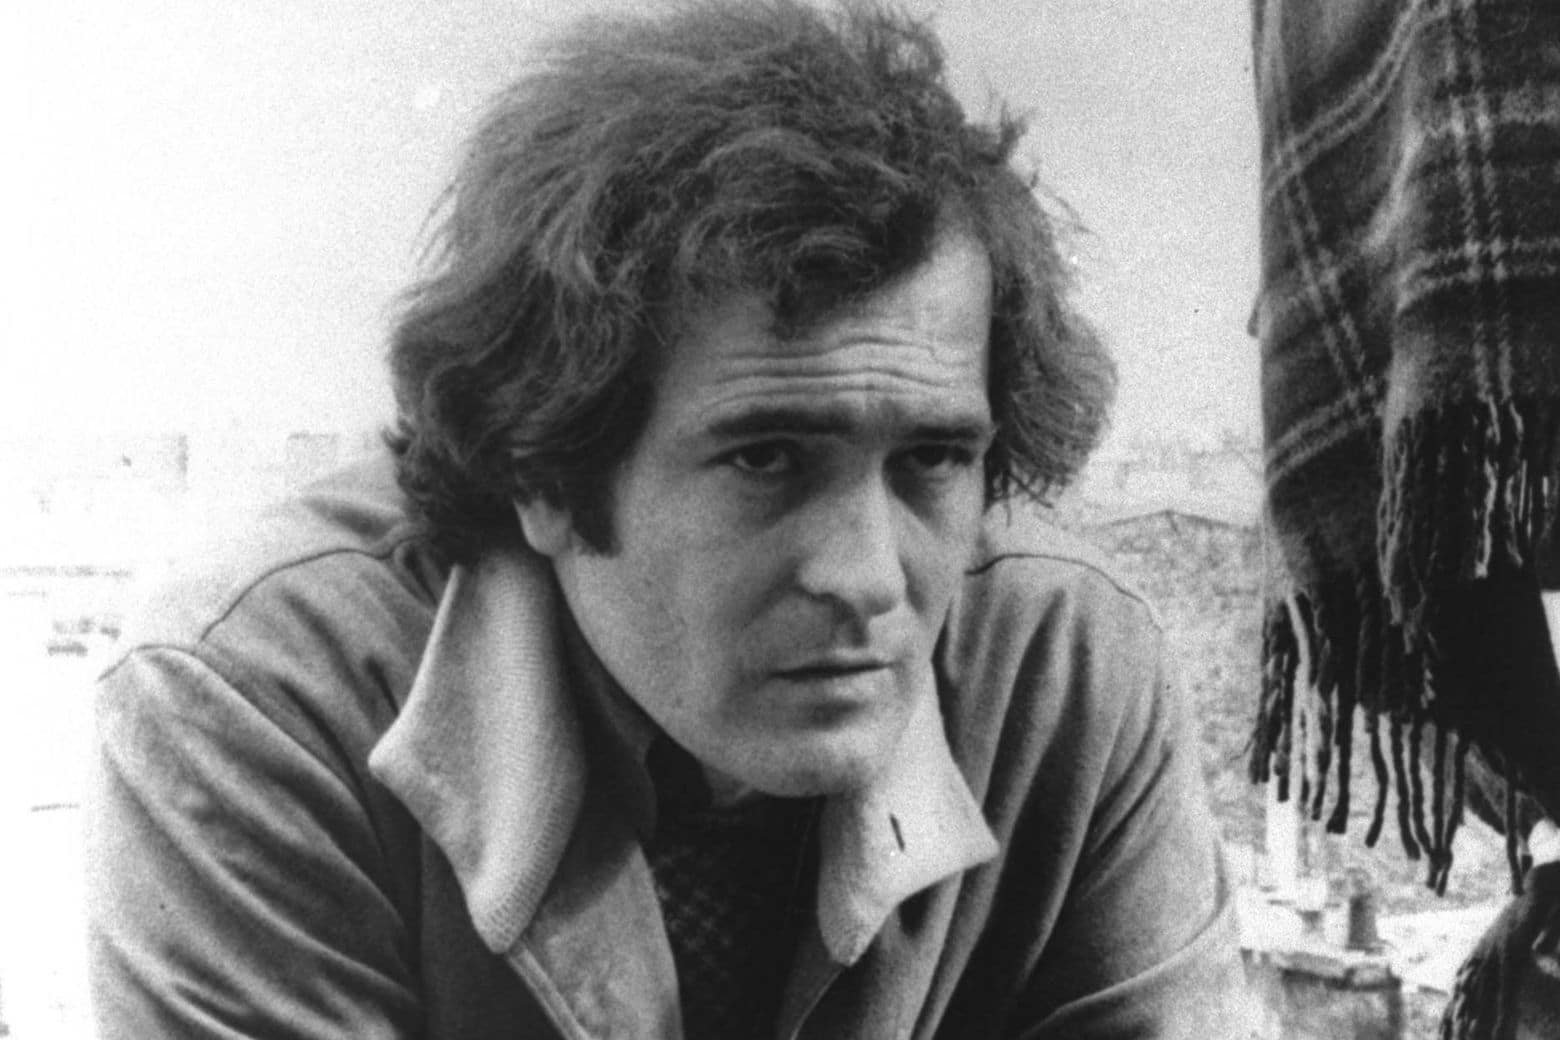 FILE -  Feb. 1972 file photo of Italian movie director Bernardo Bertolucci. Bertolucci, who won Oscars with "The Last Emperor" and whose erotic drama "Last Tango in Paris" enthralled and shocked the world, has died at the age of 77. Bertolucci's press office, Punto e Virgola, confirmed the death Monday, Nov. 26, 2018, in an email to The Associated Press. (AP Photo)